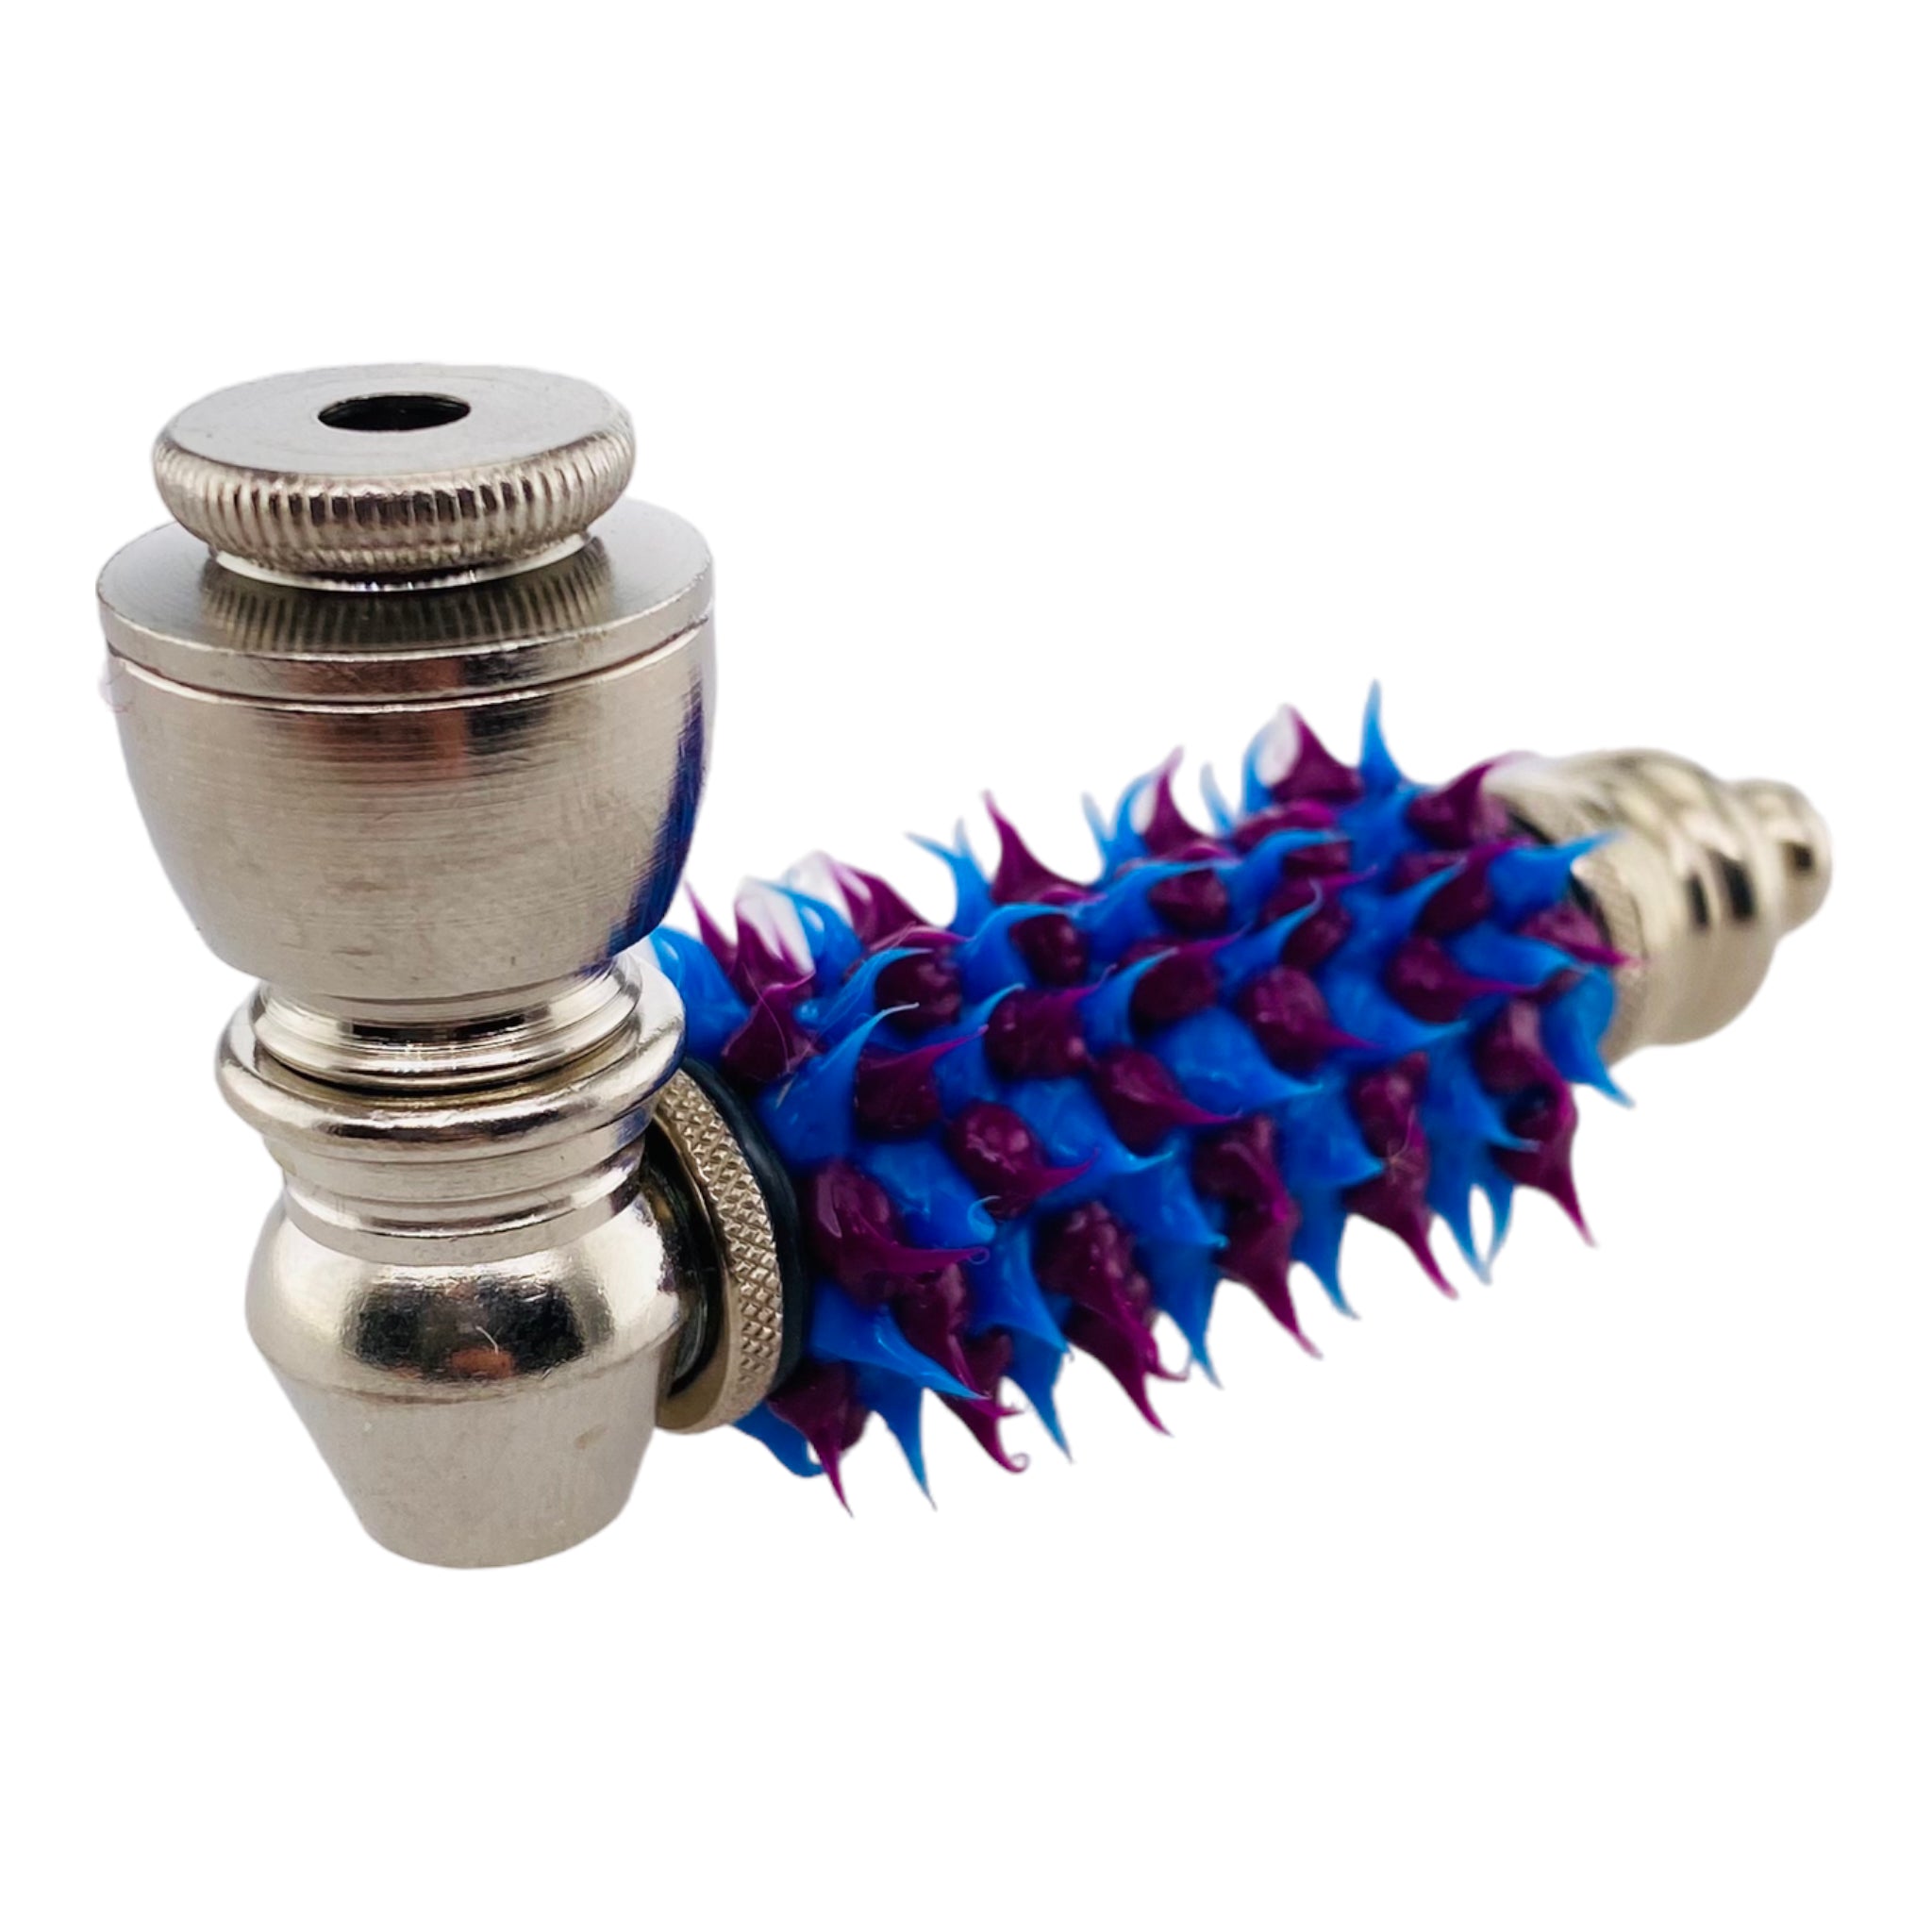 Metal Hand Pipes - Silver Chrome Hand Pipe With Blue And Purple Silicone Spikes